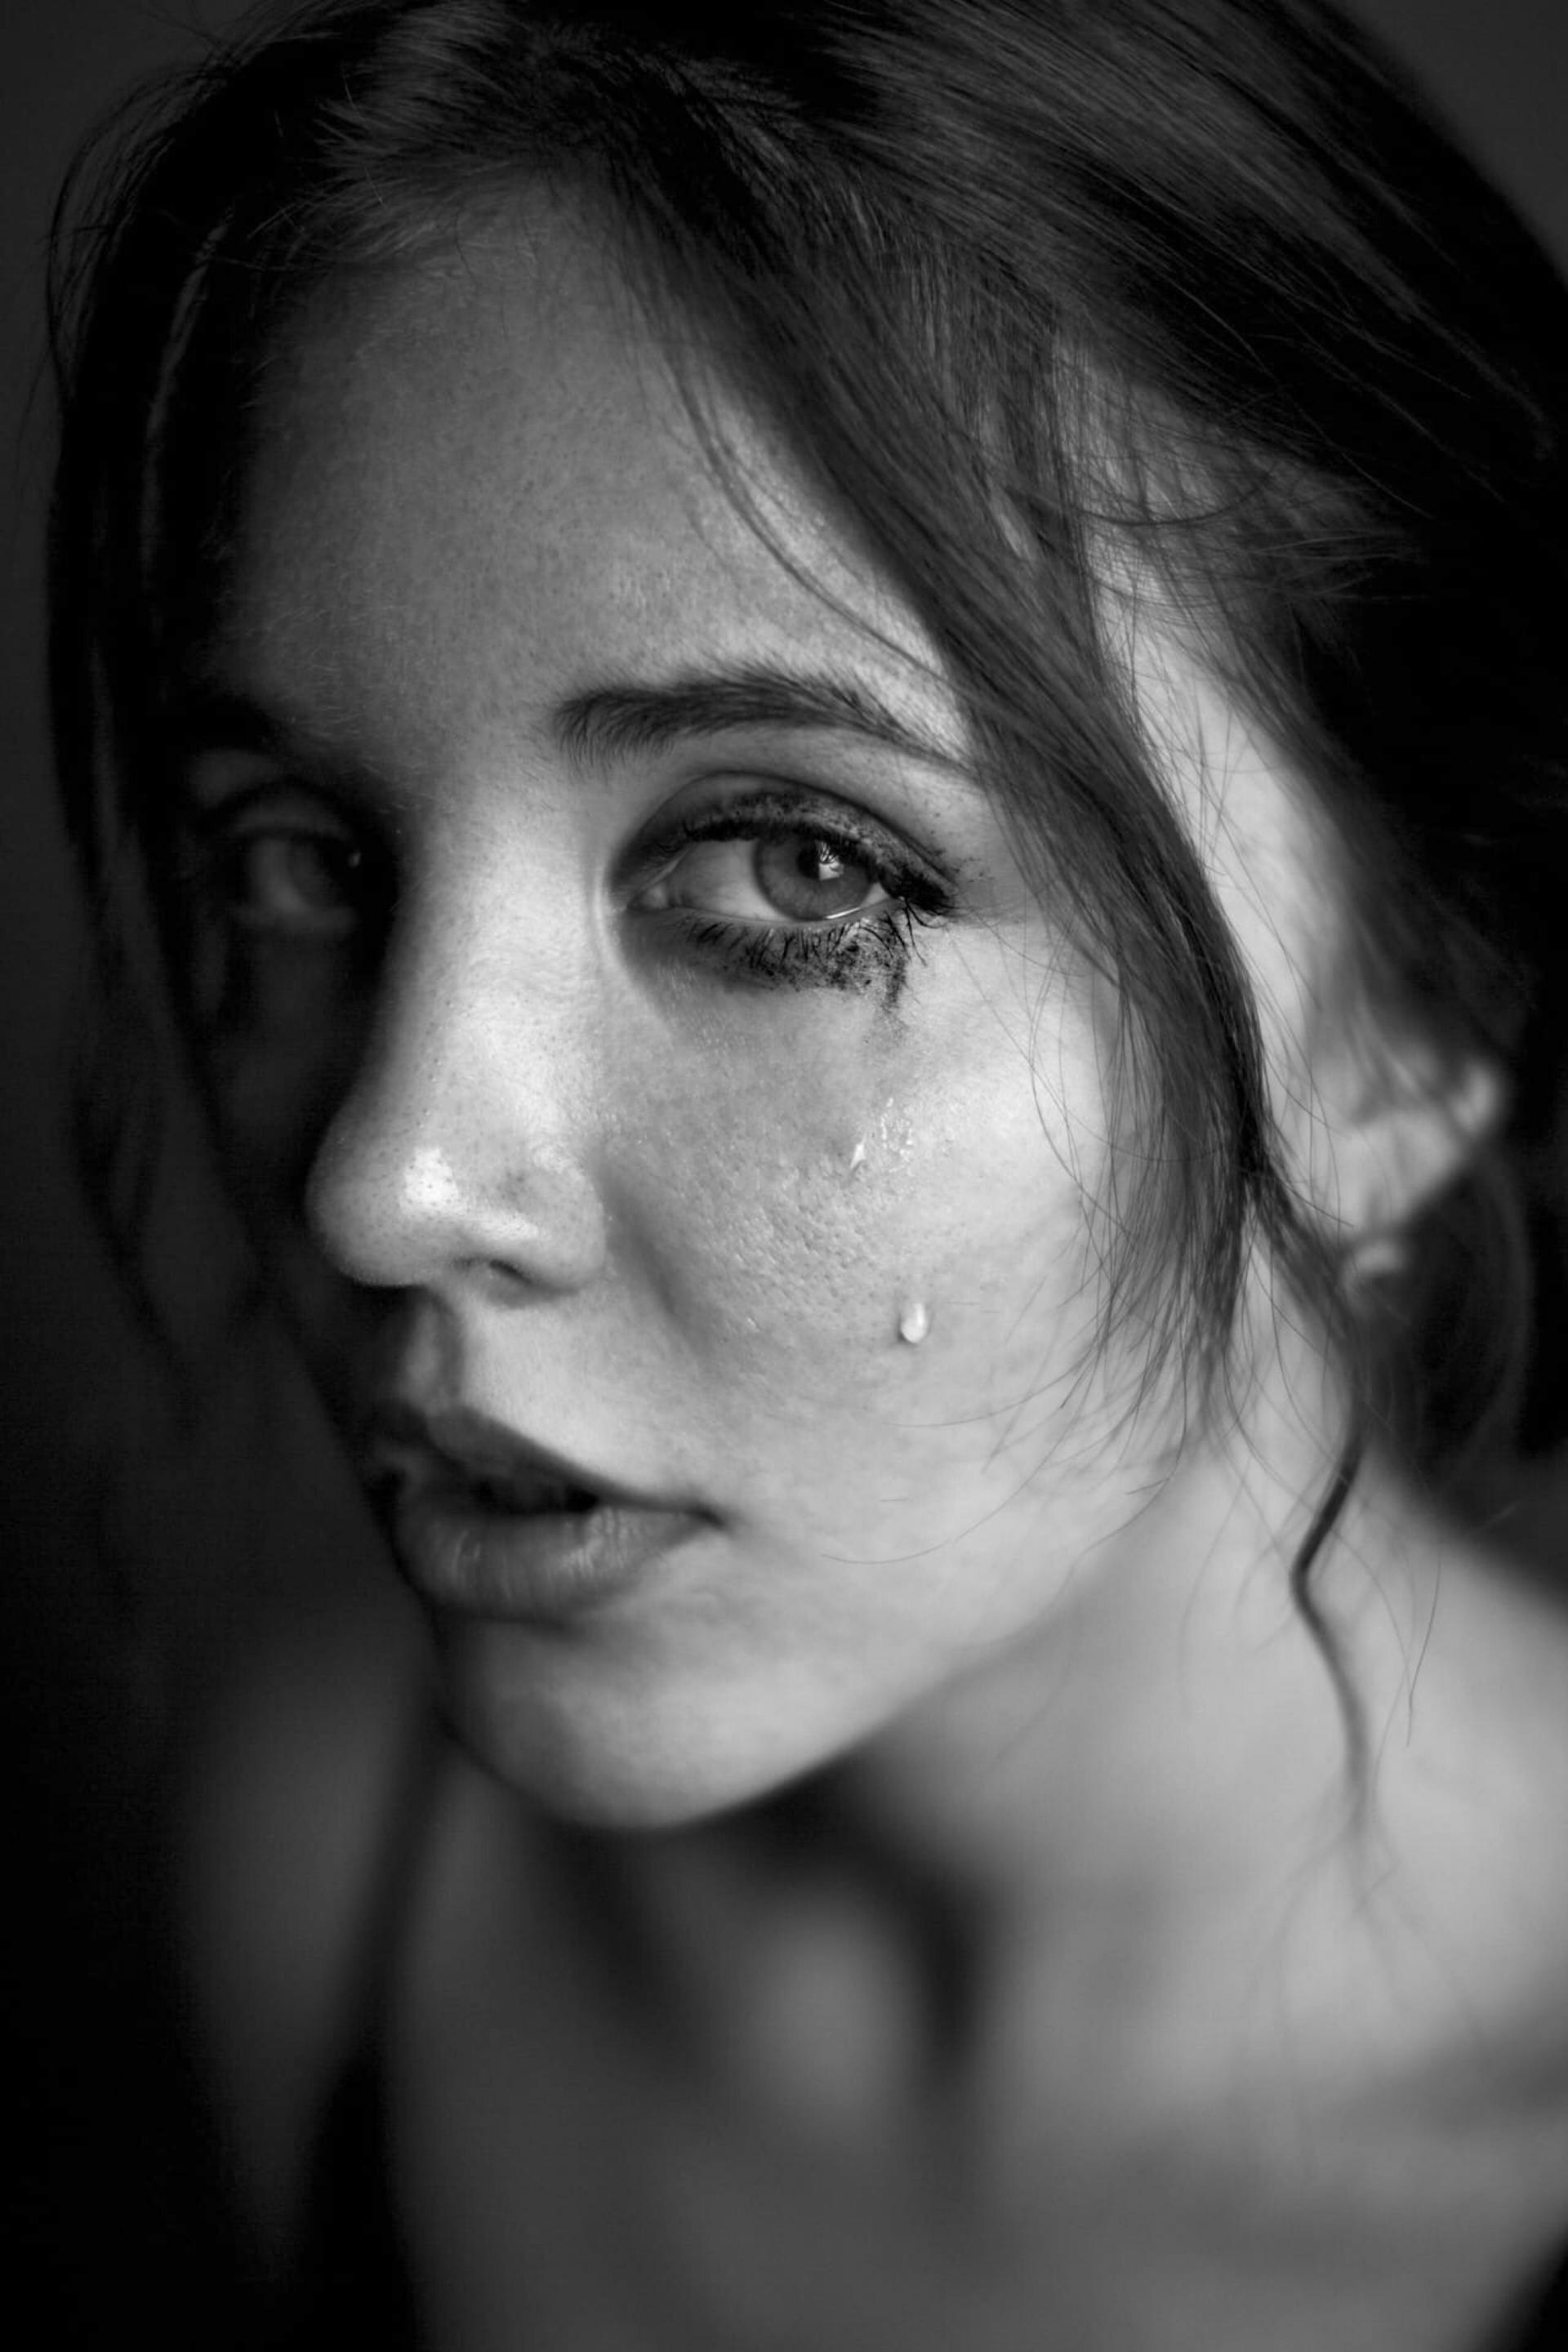 A close-up of a crying woman | Source: Pexels